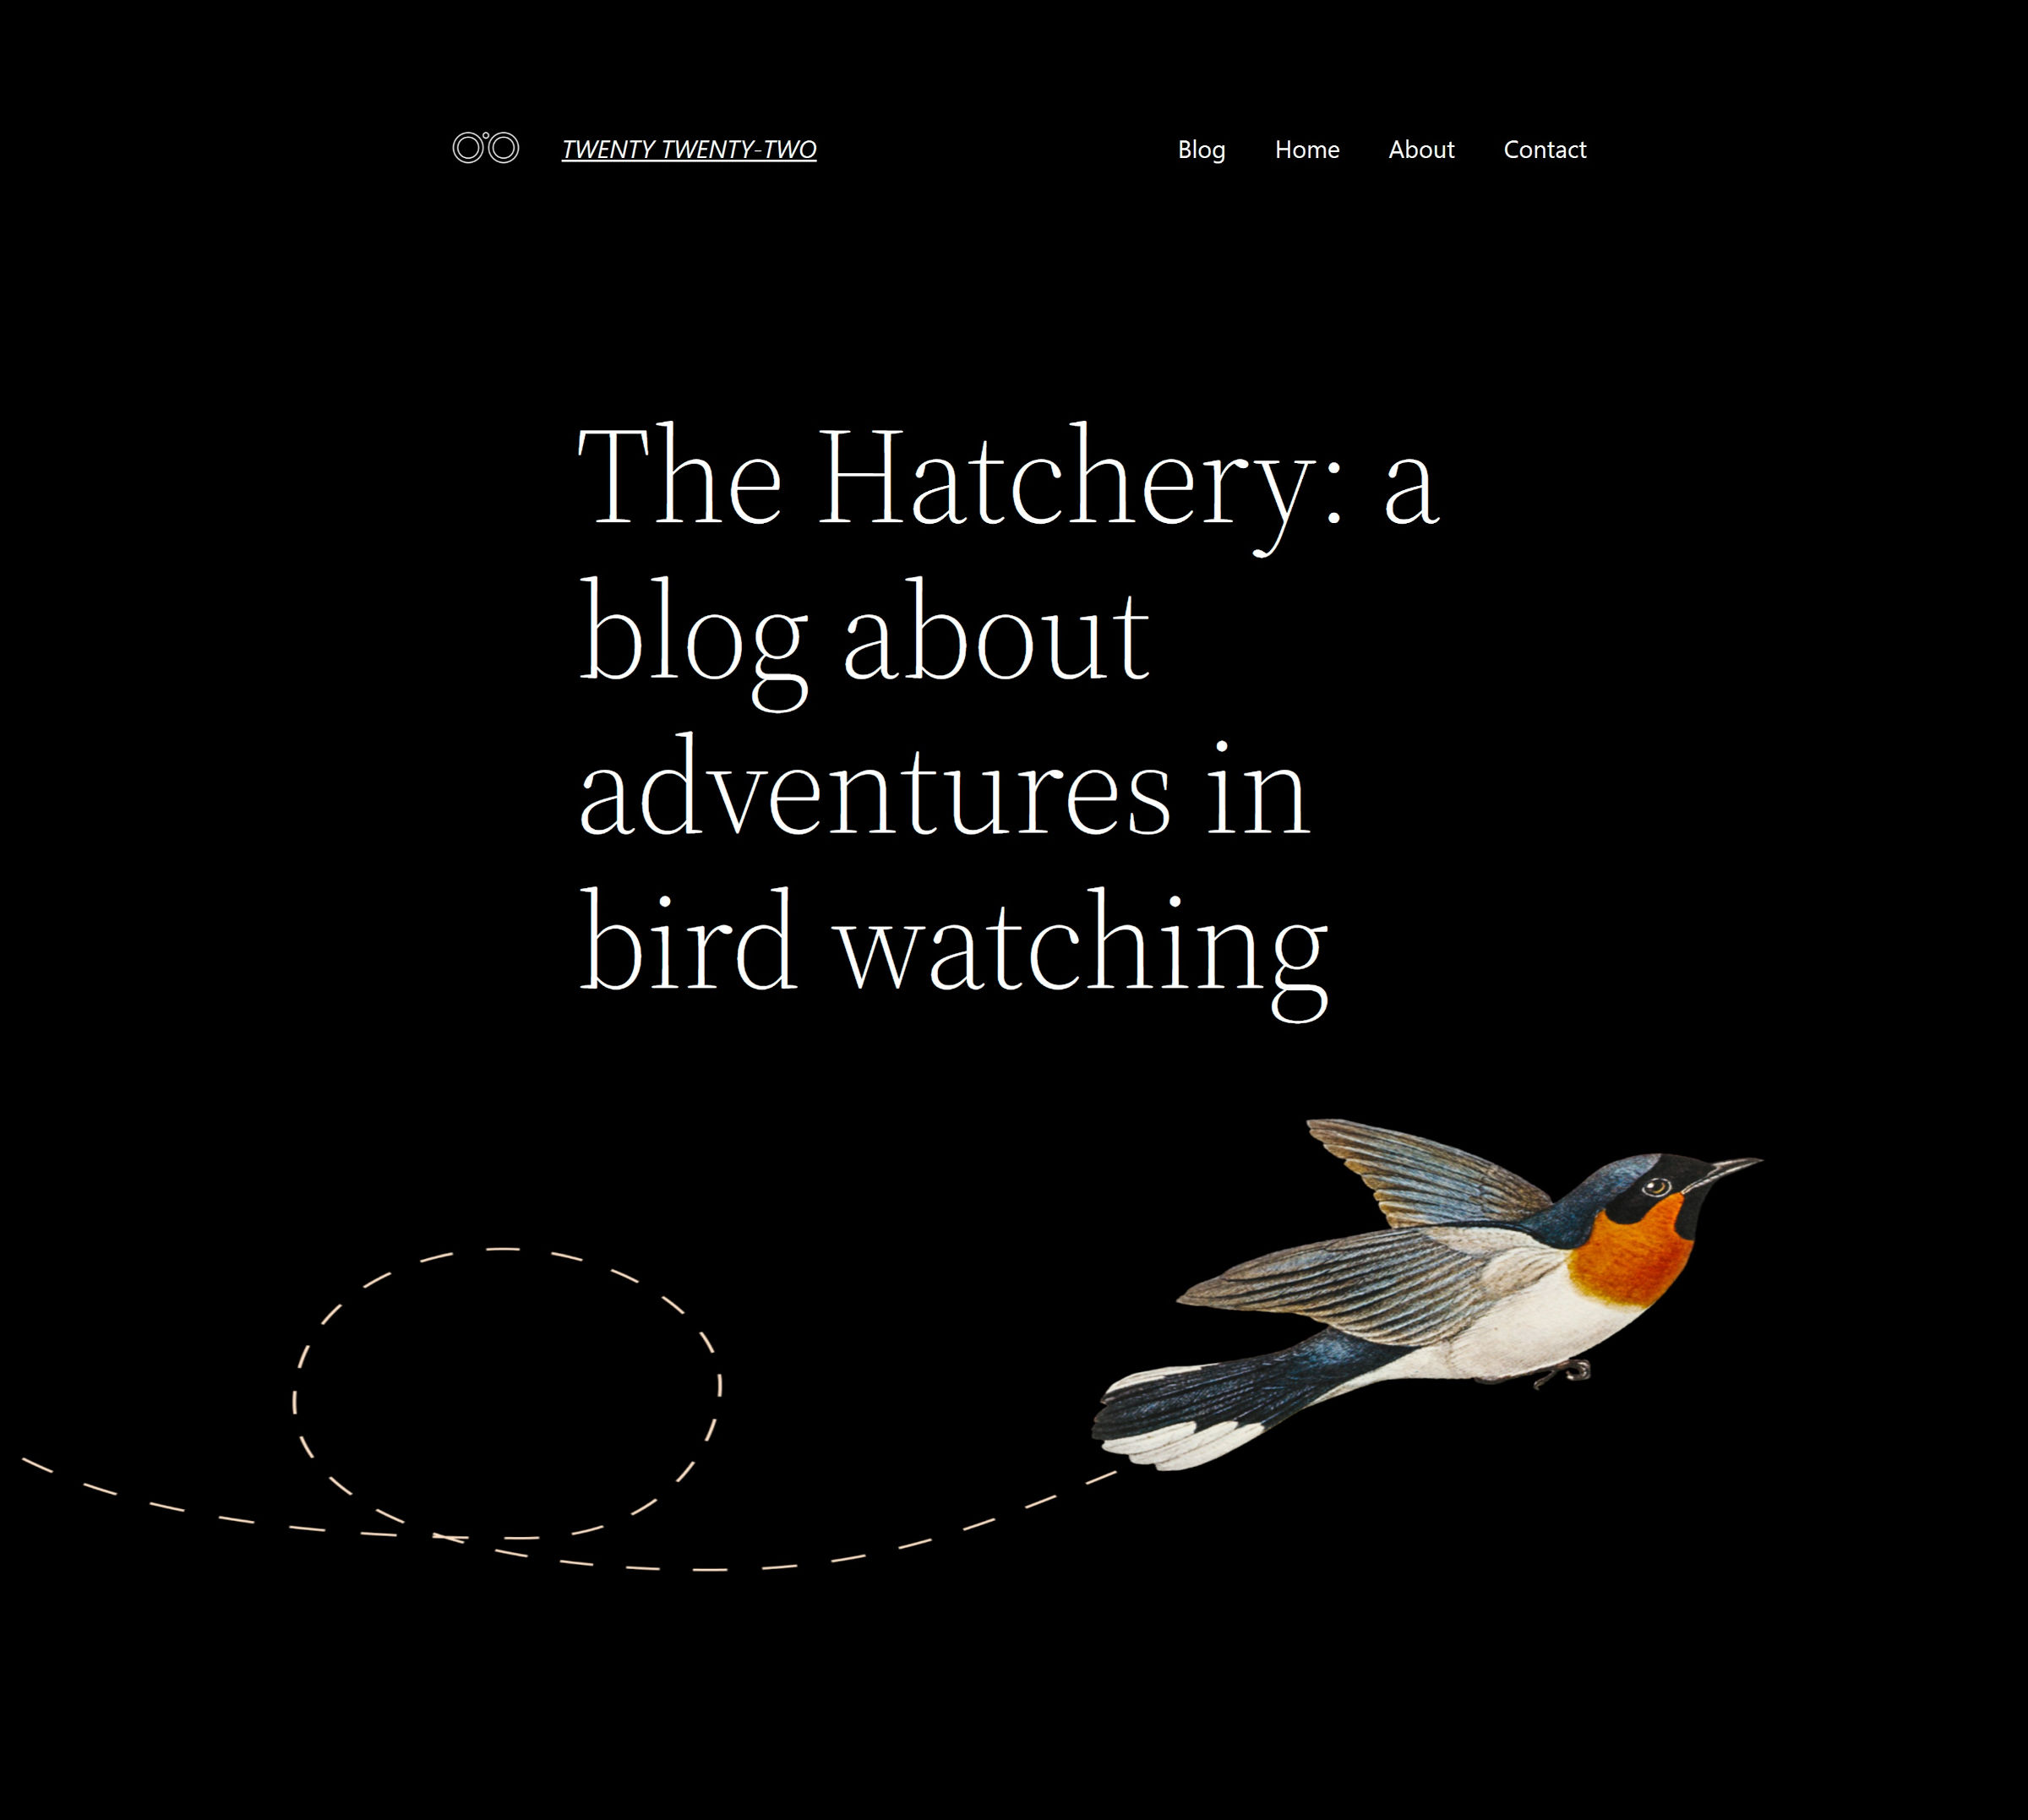 About page design with a logo, title, and menu at the top.  Following that is a large intro section and a picture of a bird.